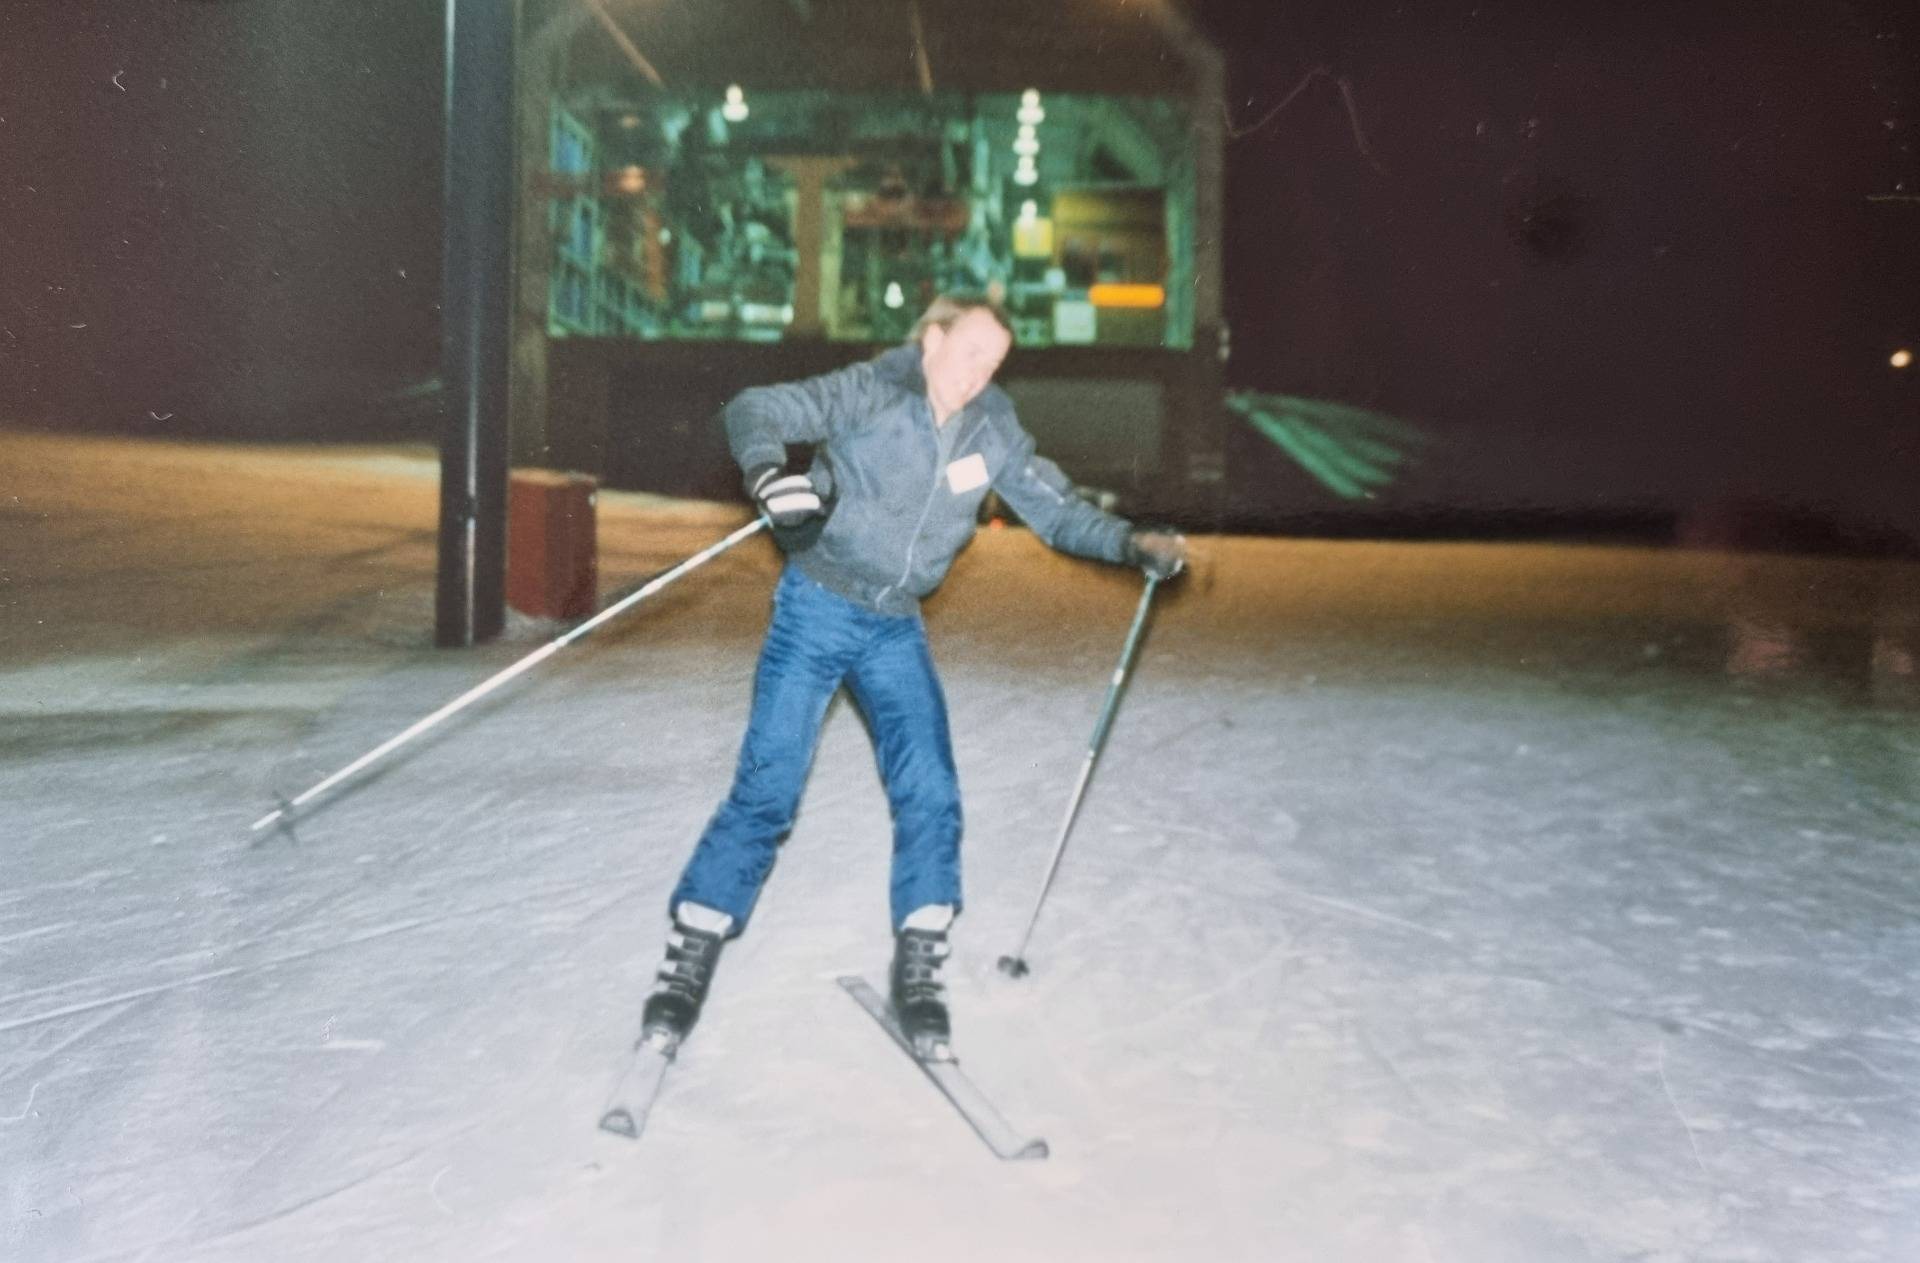 Night skiing. It was pretty new and novel back then. They only had one short run that had lights and had a chair lift working.